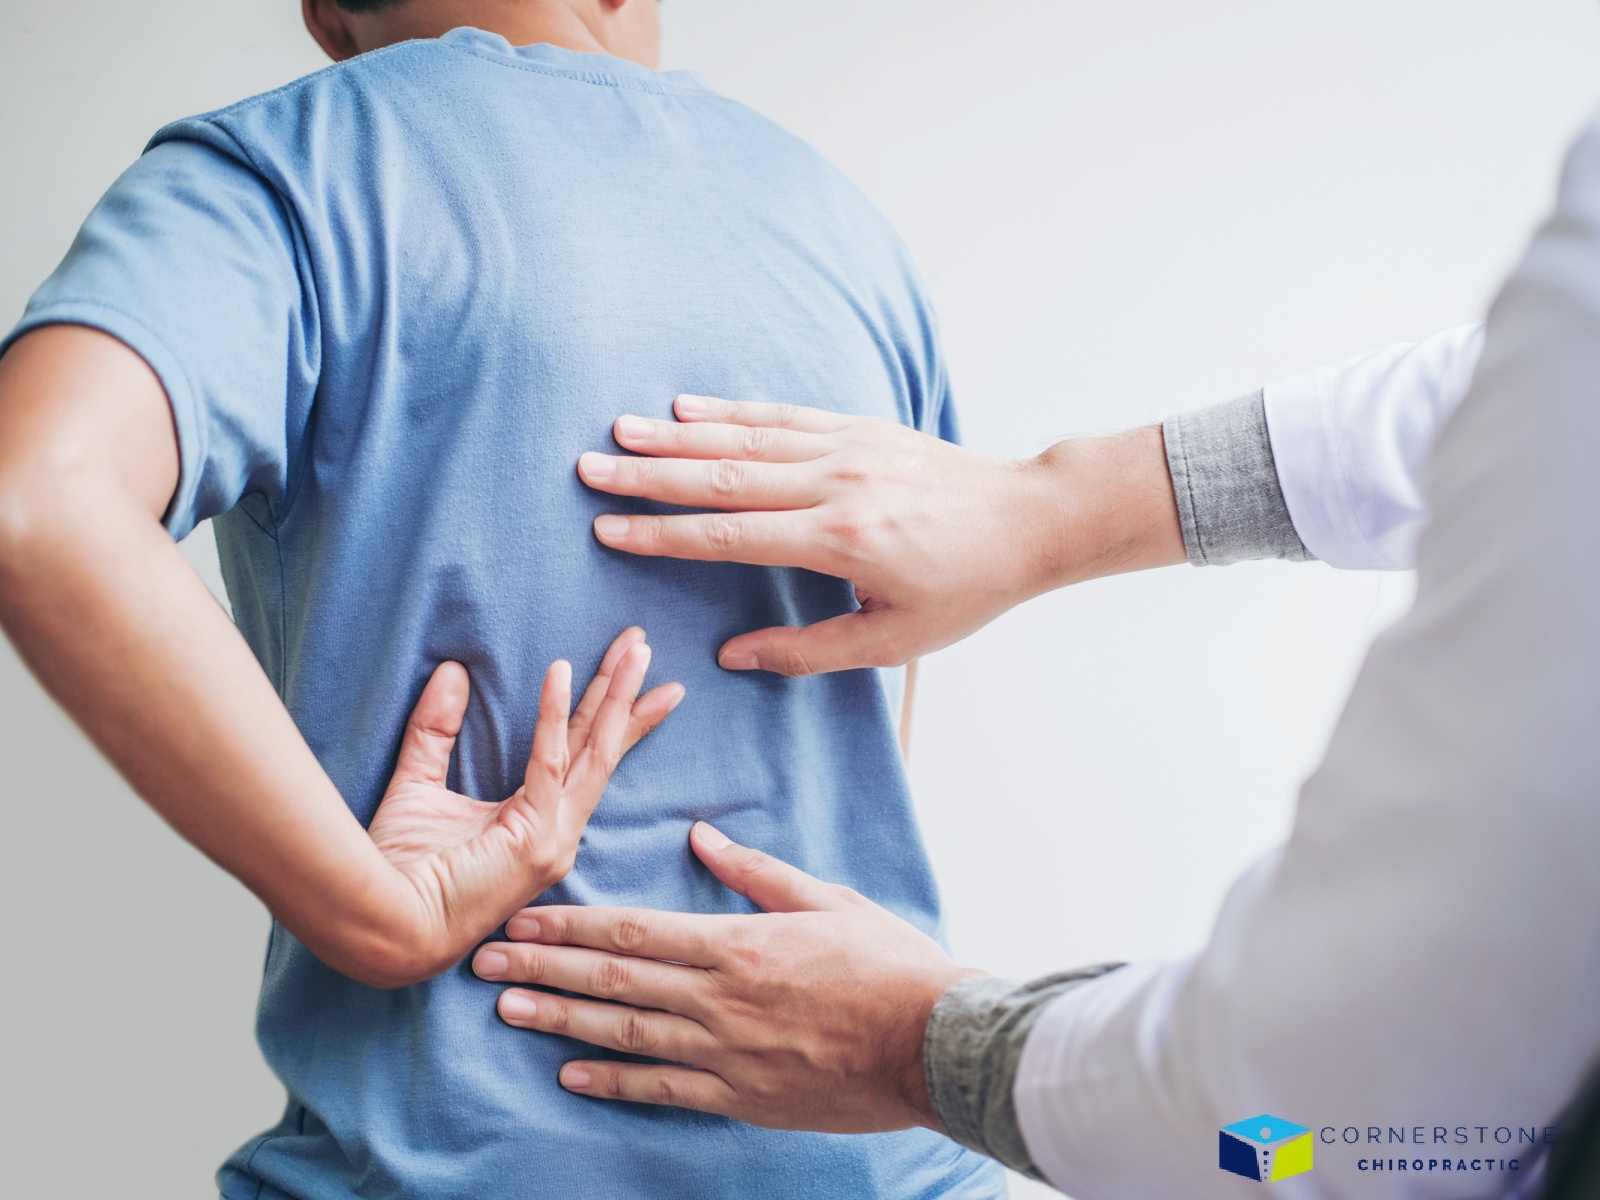 Finding Relief with Chiropractic Care Near Machias